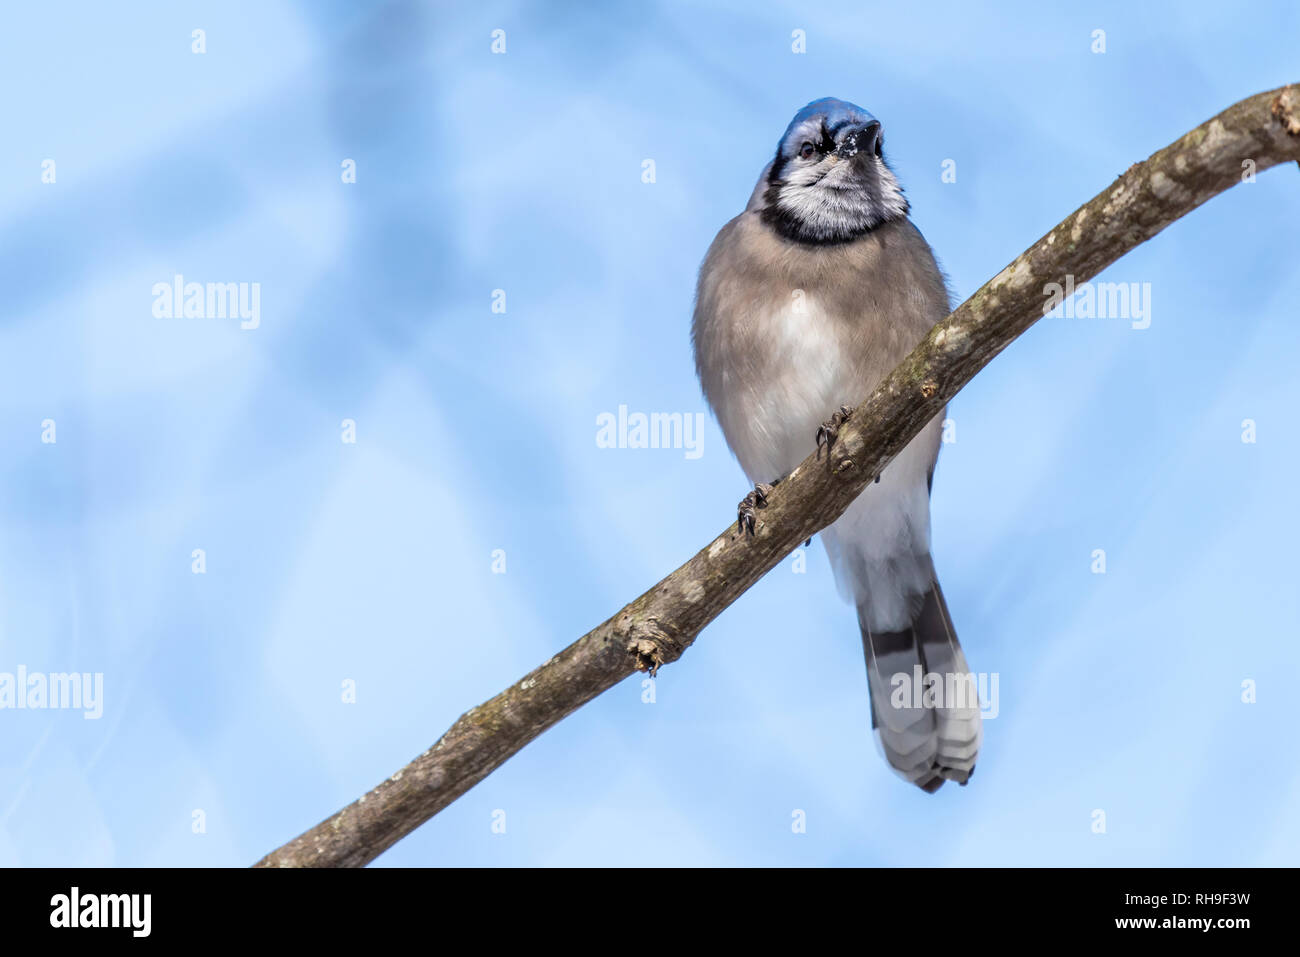 Blue Jay (Cyanocitta cristata) perched on a branch against a blue background in the winter. Stock Photo